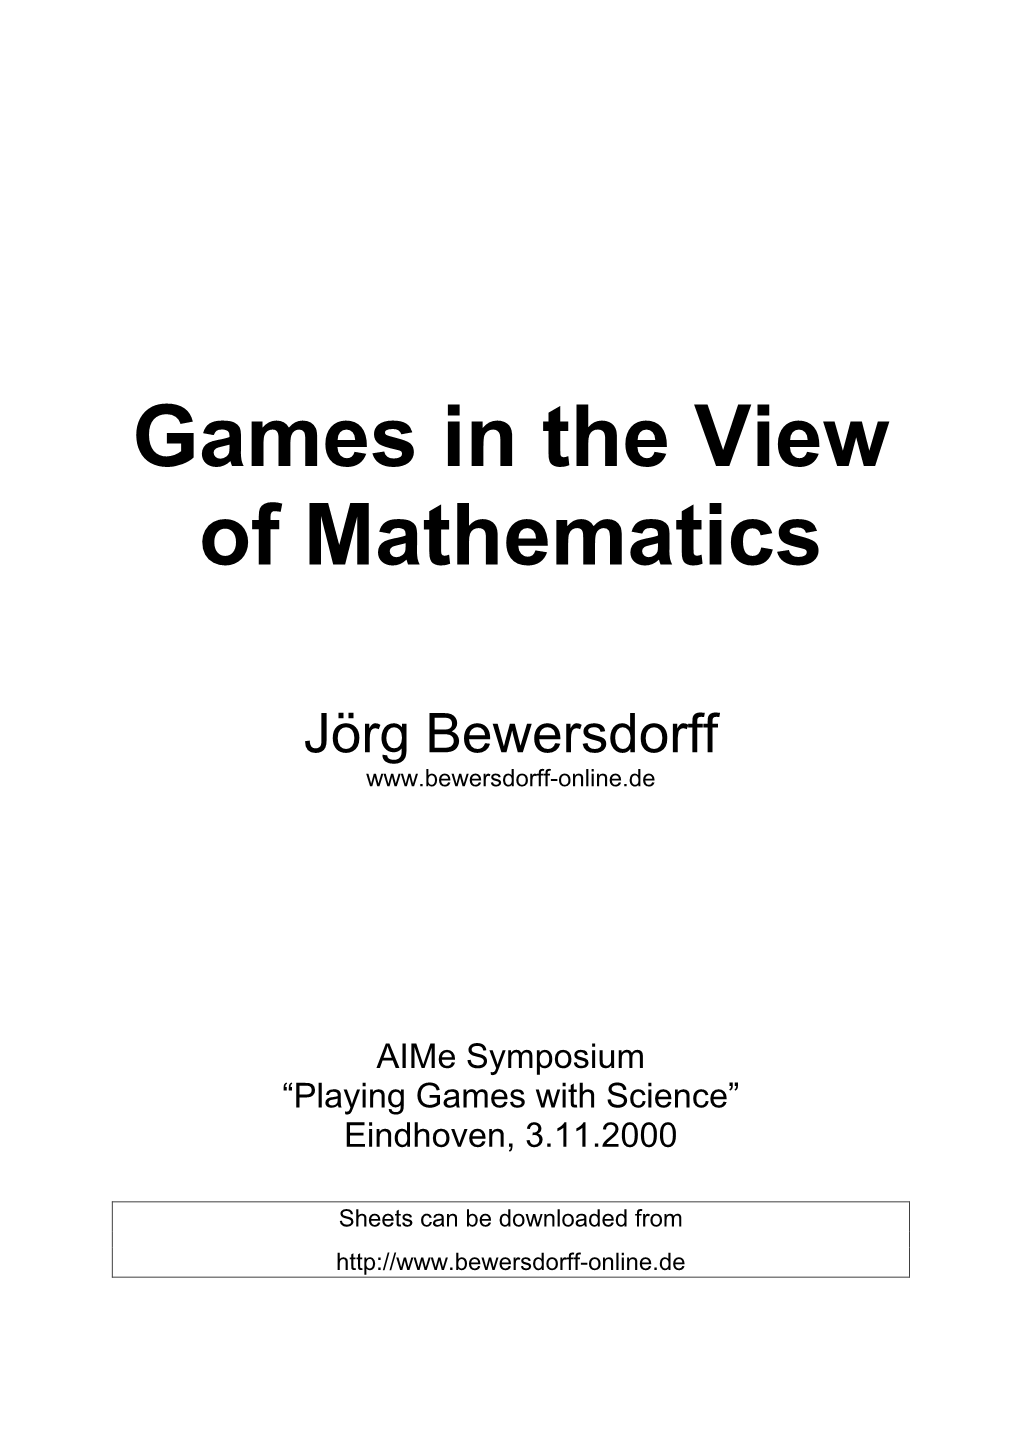 Games in the View of Mathematics